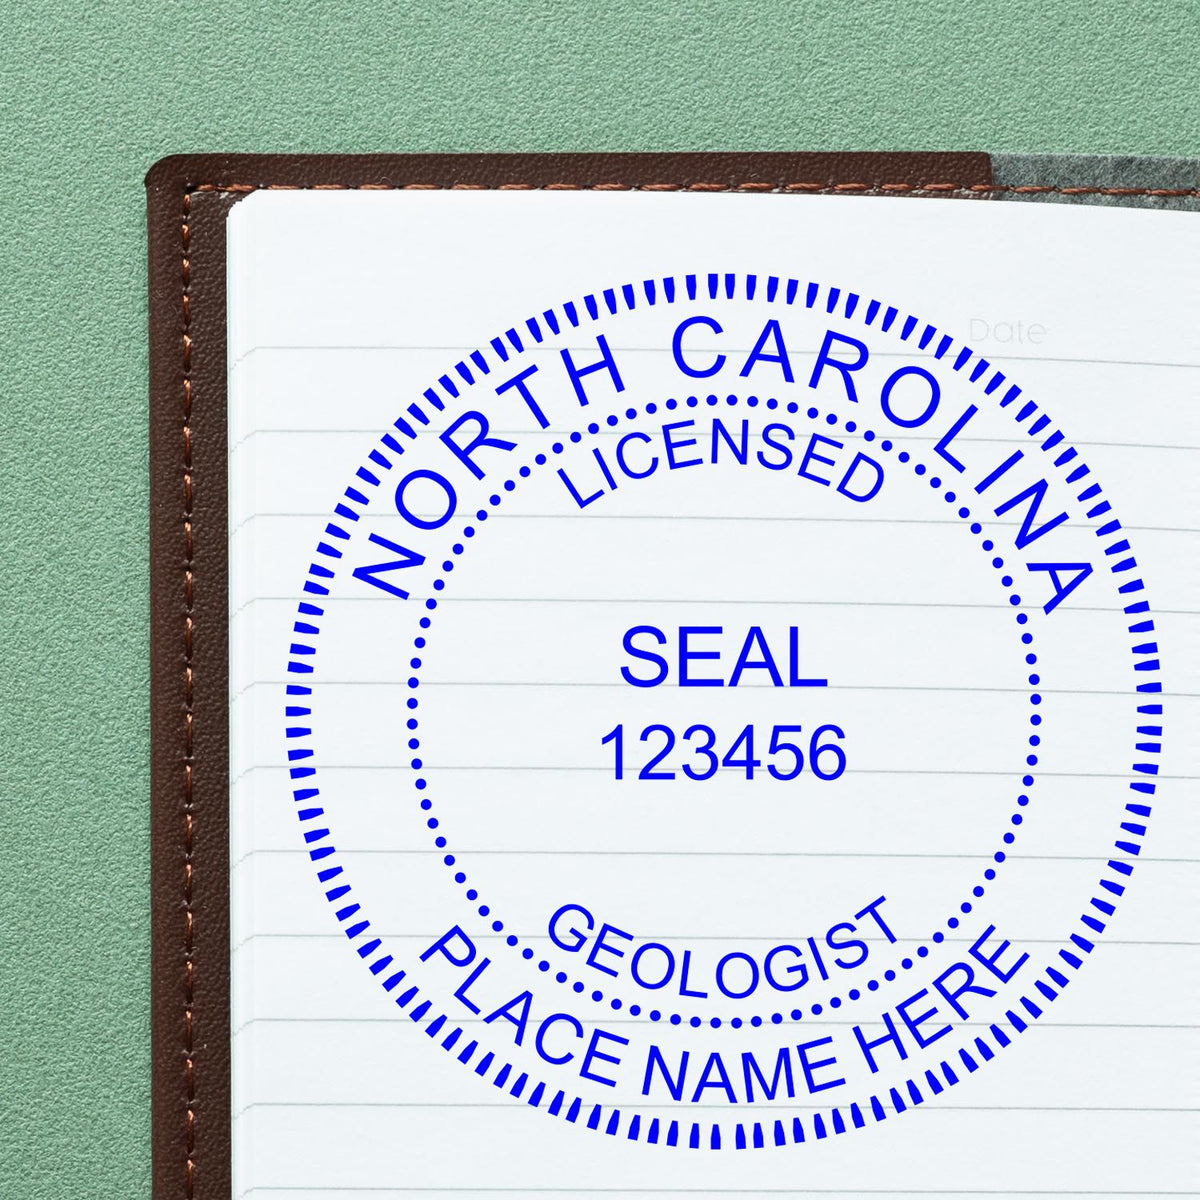 The Slim Pre-Inked North Carolina Professional Geologist Seal Stamp stamp impression comes to life with a crisp, detailed image stamped on paper - showcasing true professional quality.